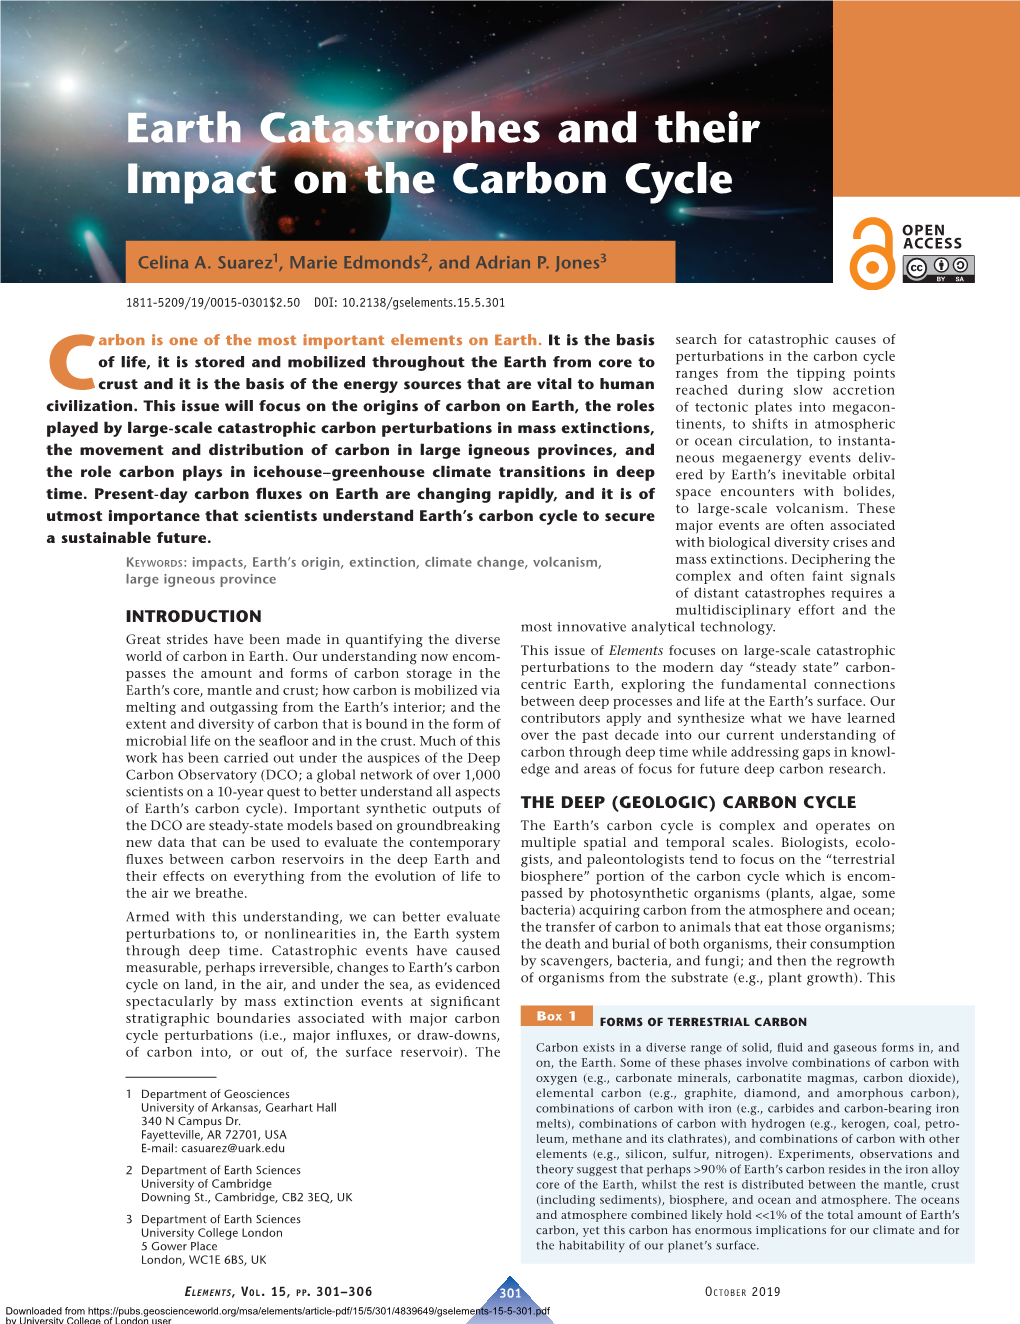 Earth Catastrophes and Their Impact on the Carbon Cycle